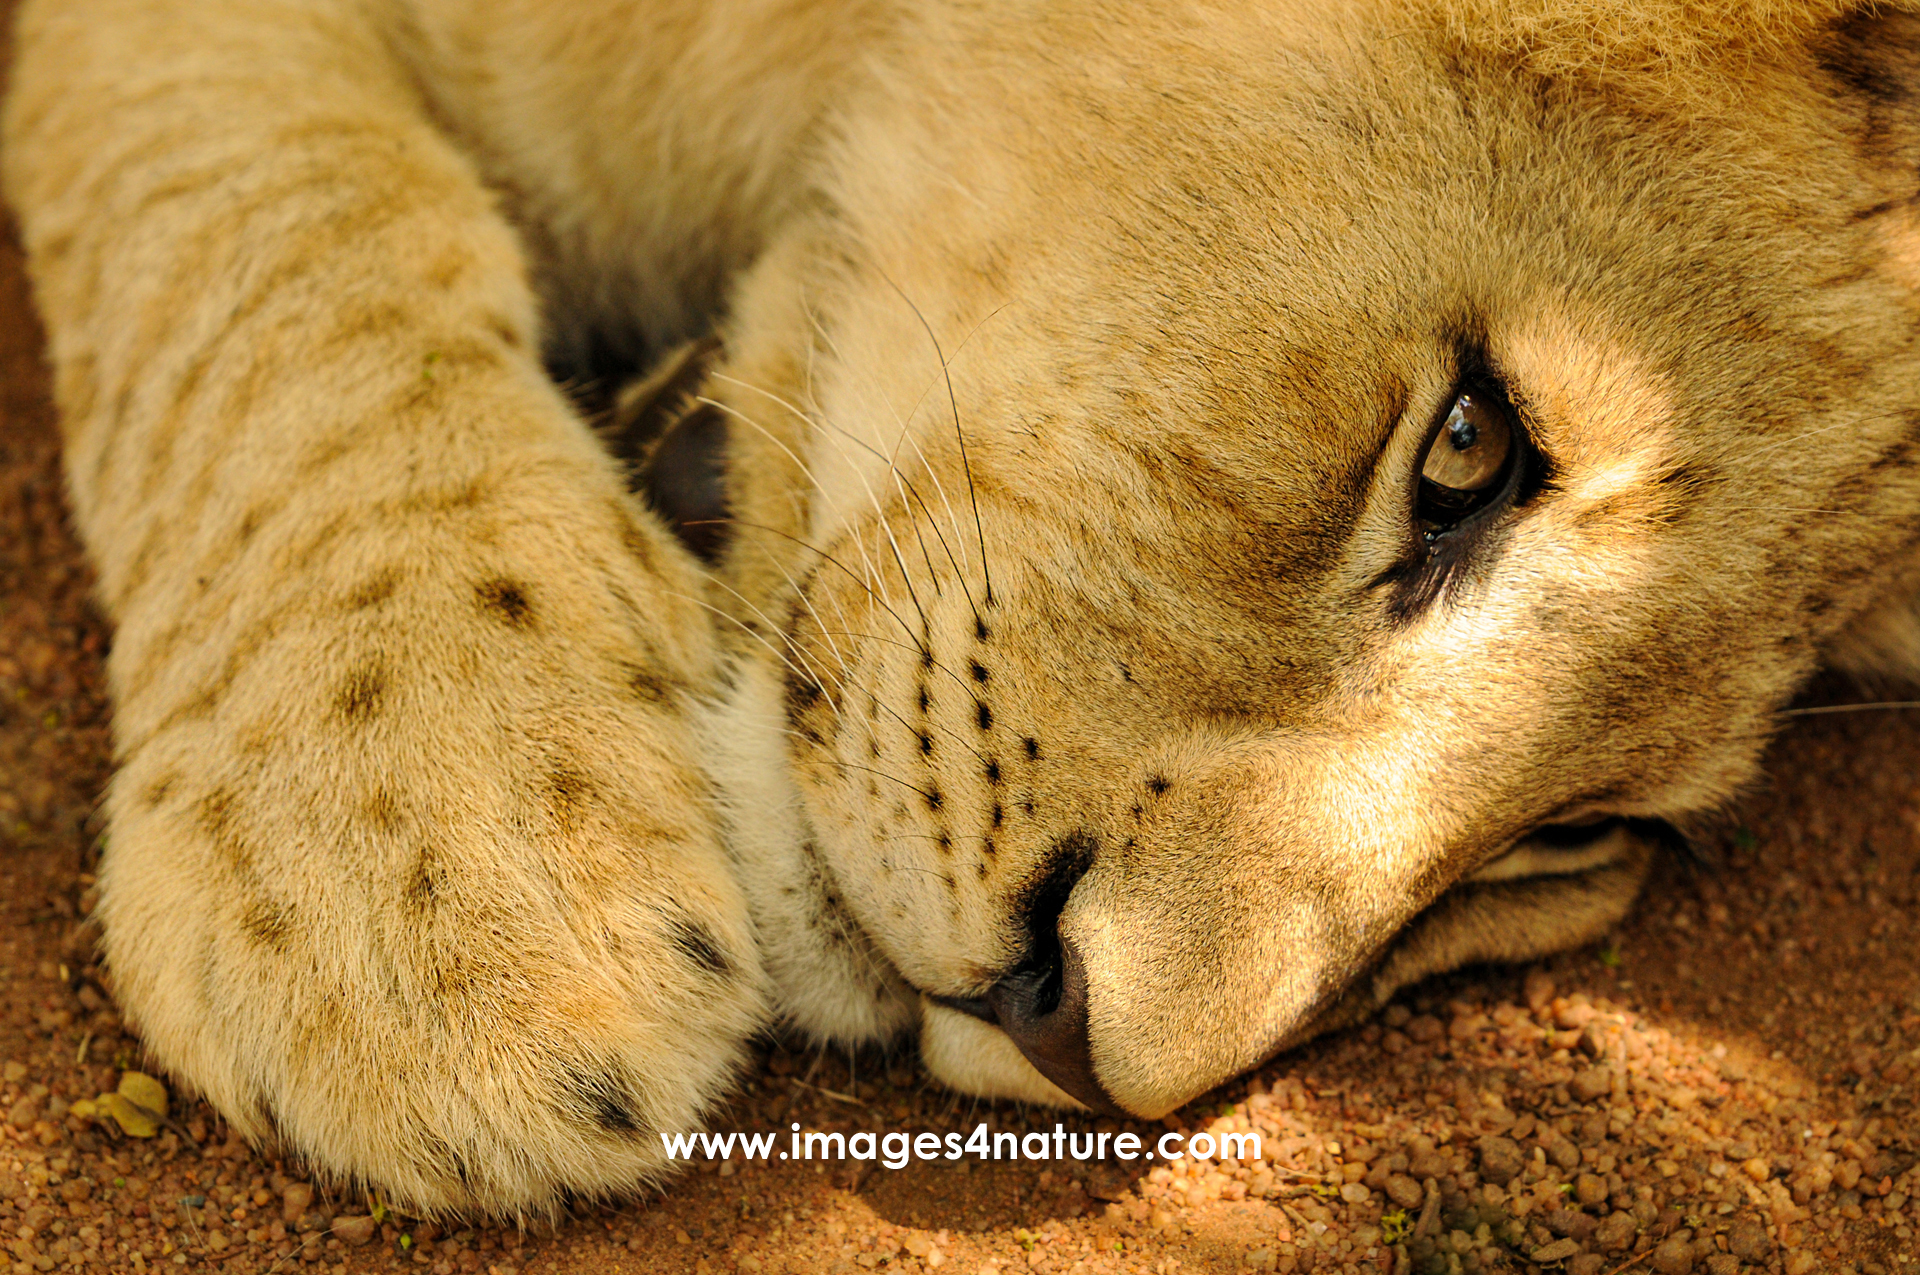 Close-up on cute lion cub face and paw, resting on the ground